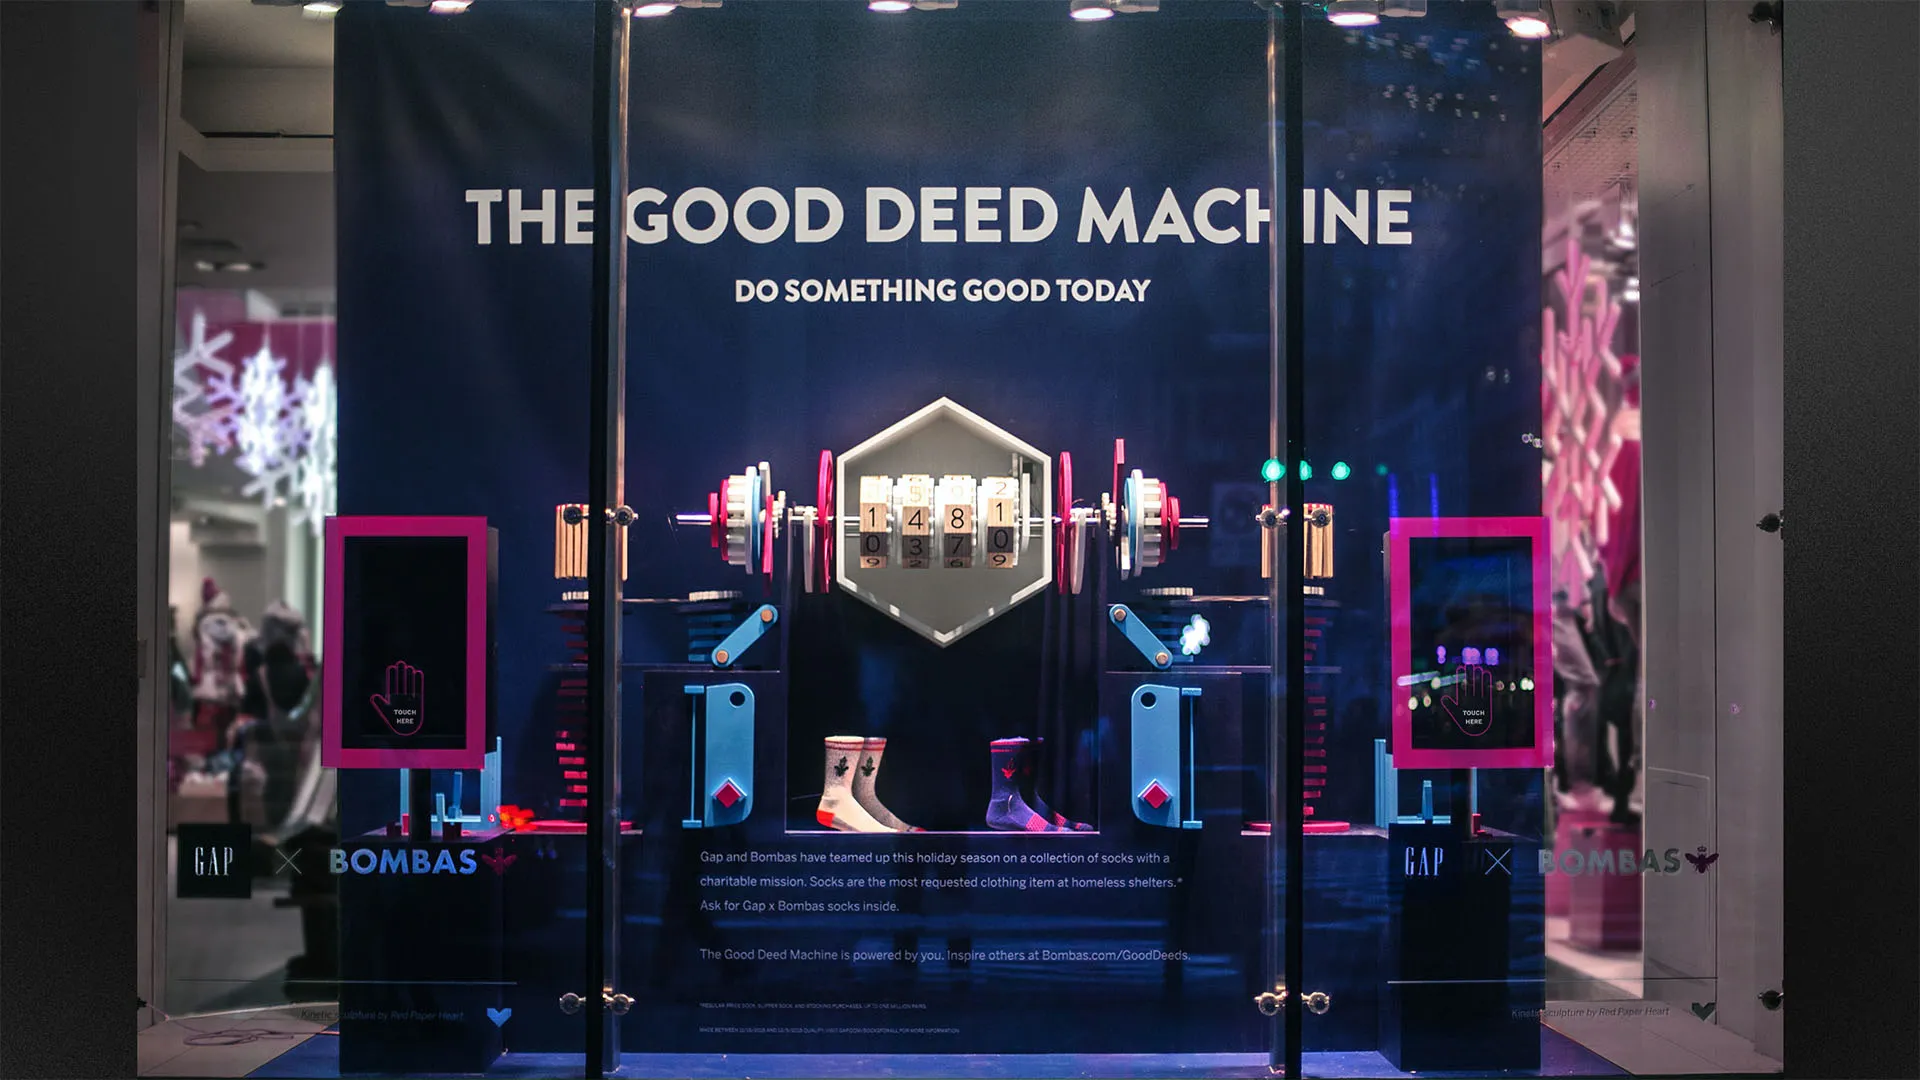 The Good Deed Machine - installation at the NYC Gap over the holiday season